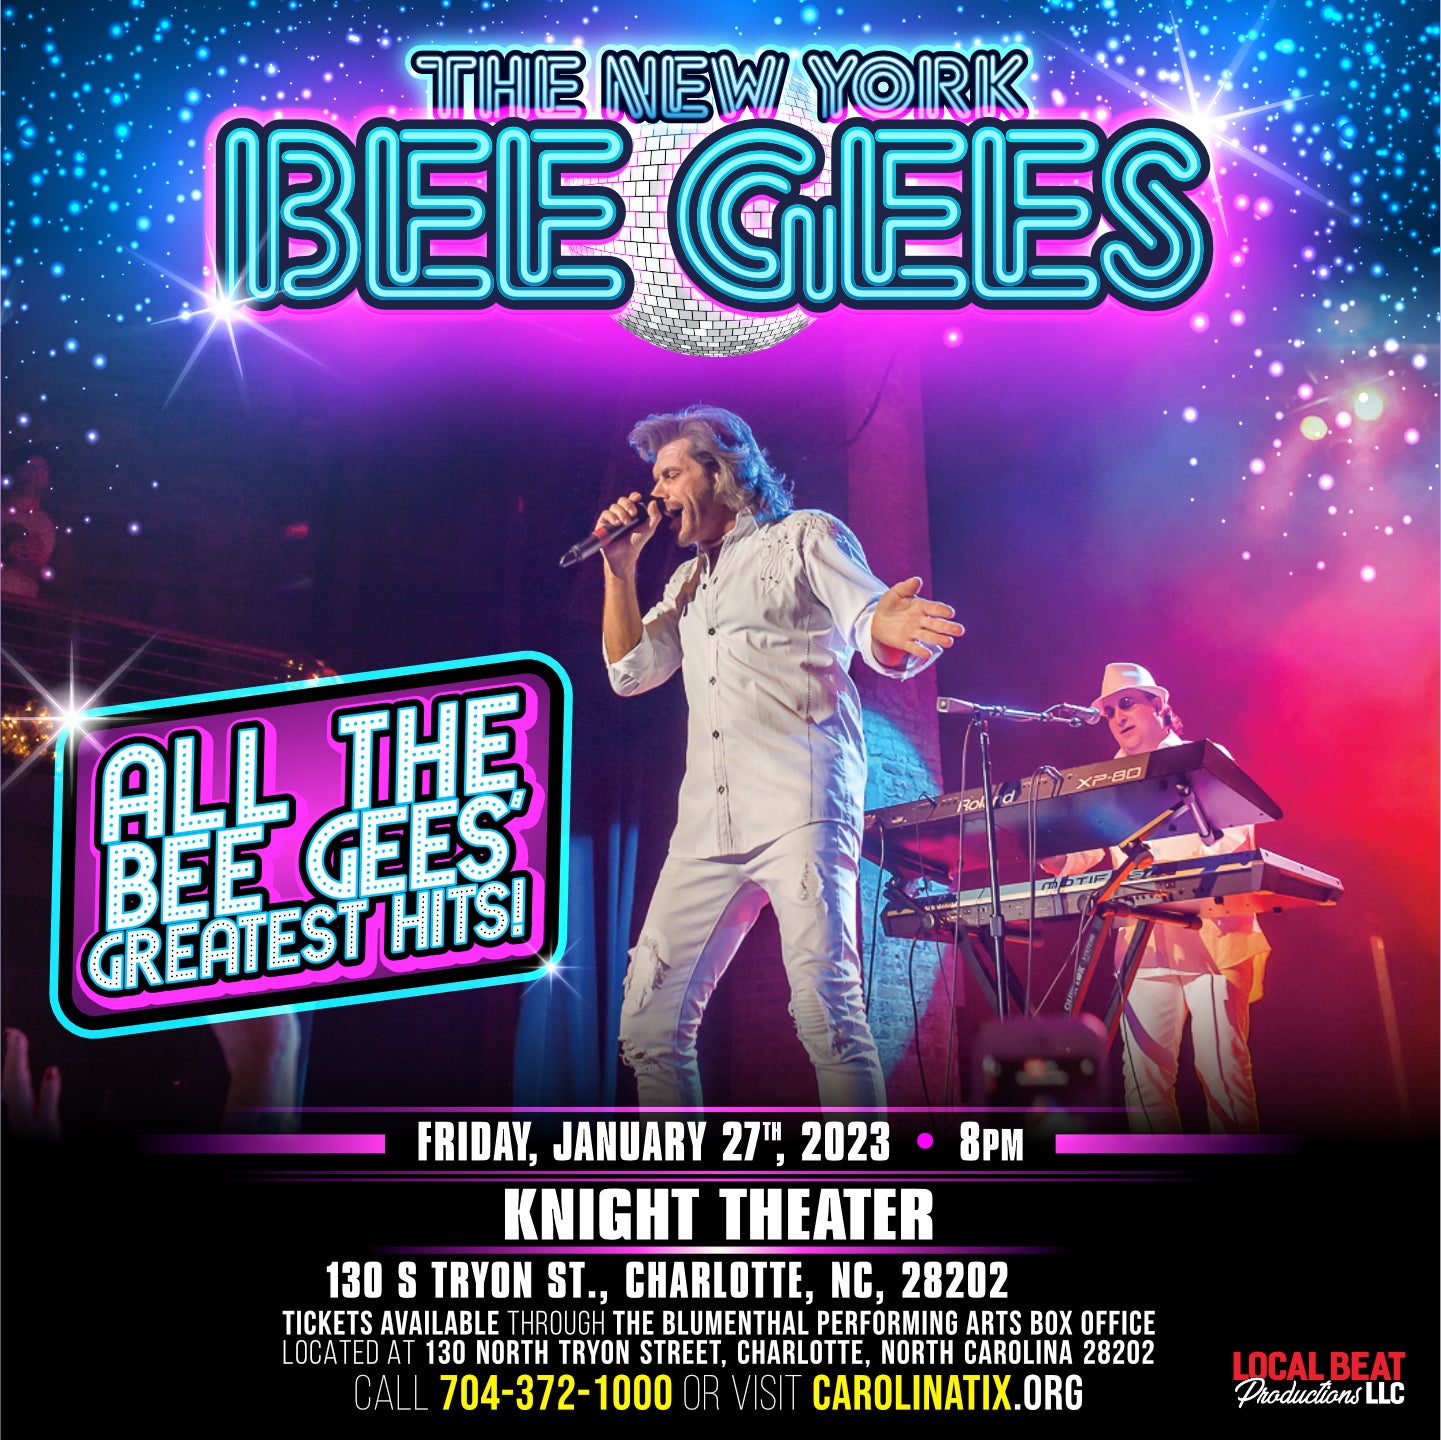 The New York Bee Gees Tribute Show